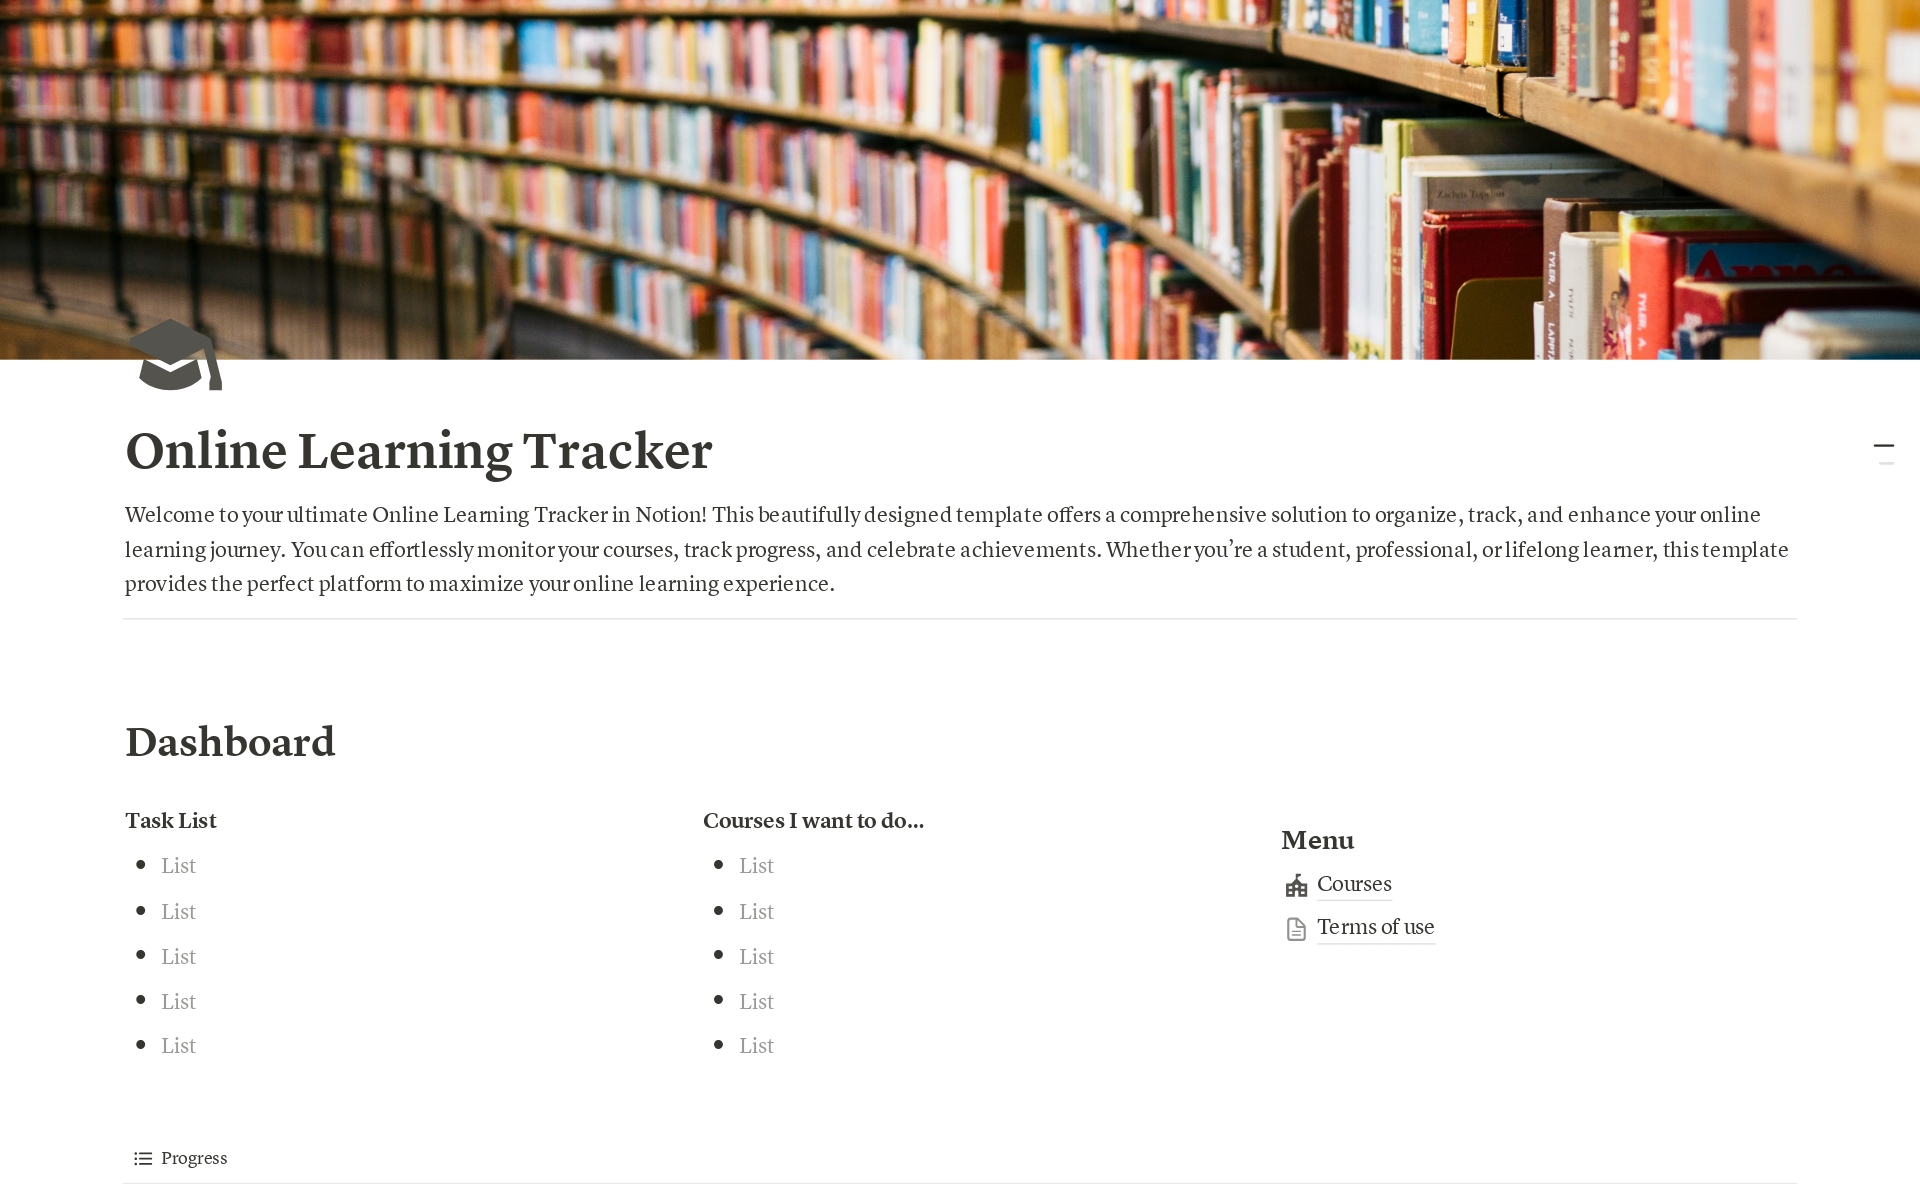 A simple to use online education tracker to keep track of all your online courses and the courses you want to do in the future.